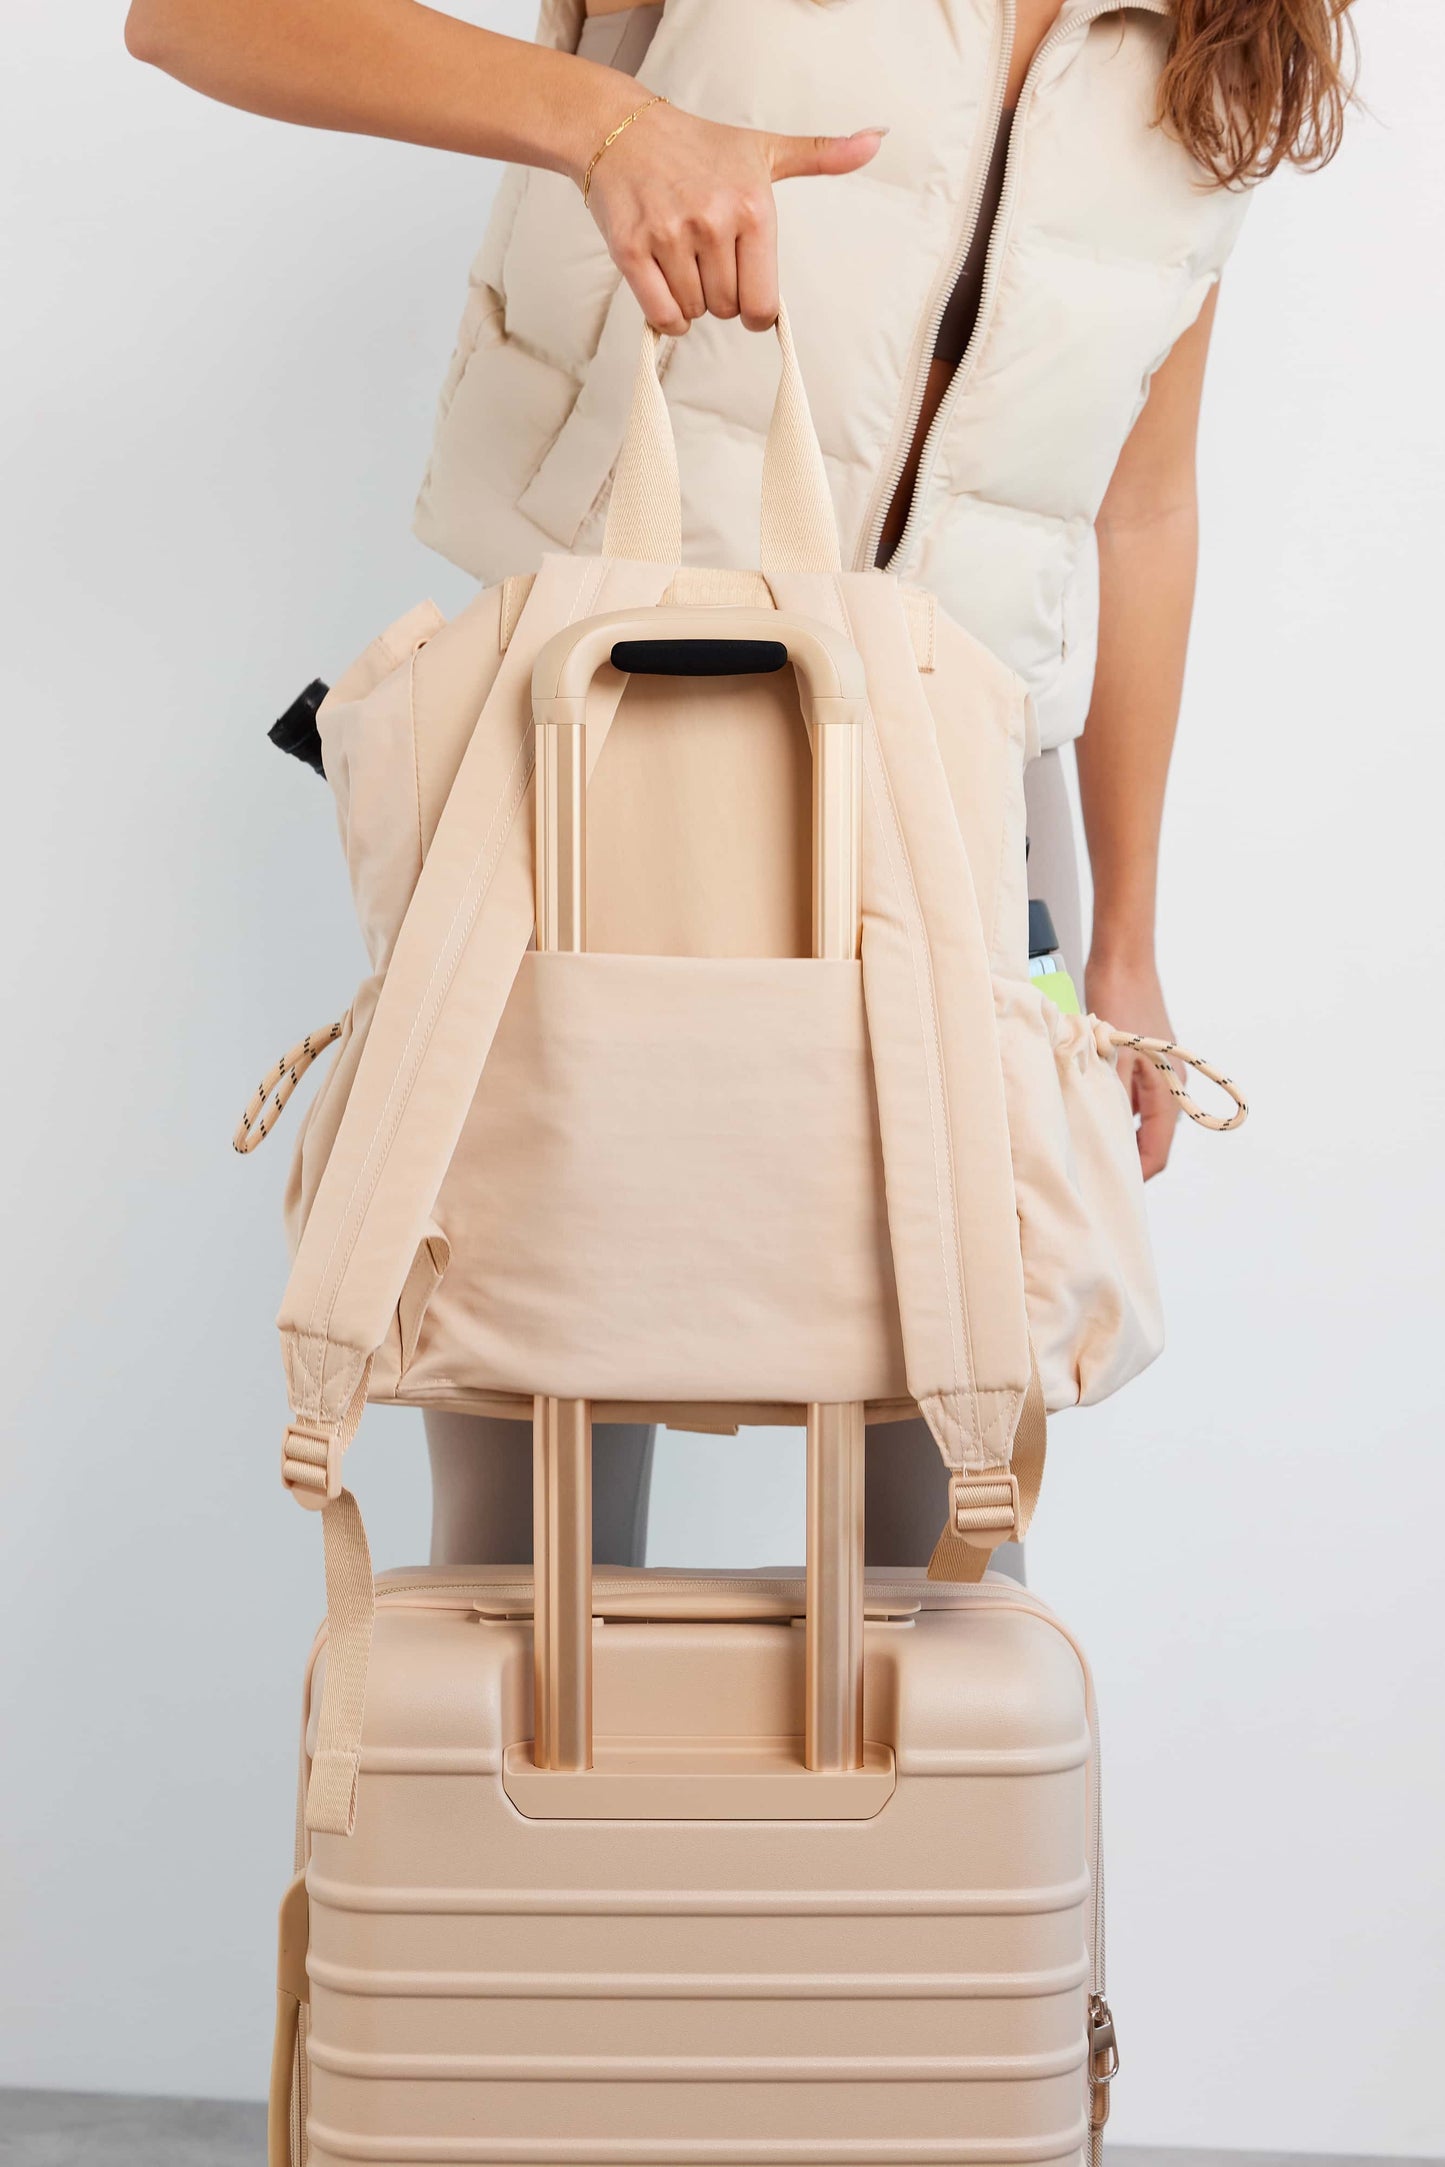 The Sport Backpack in Beige